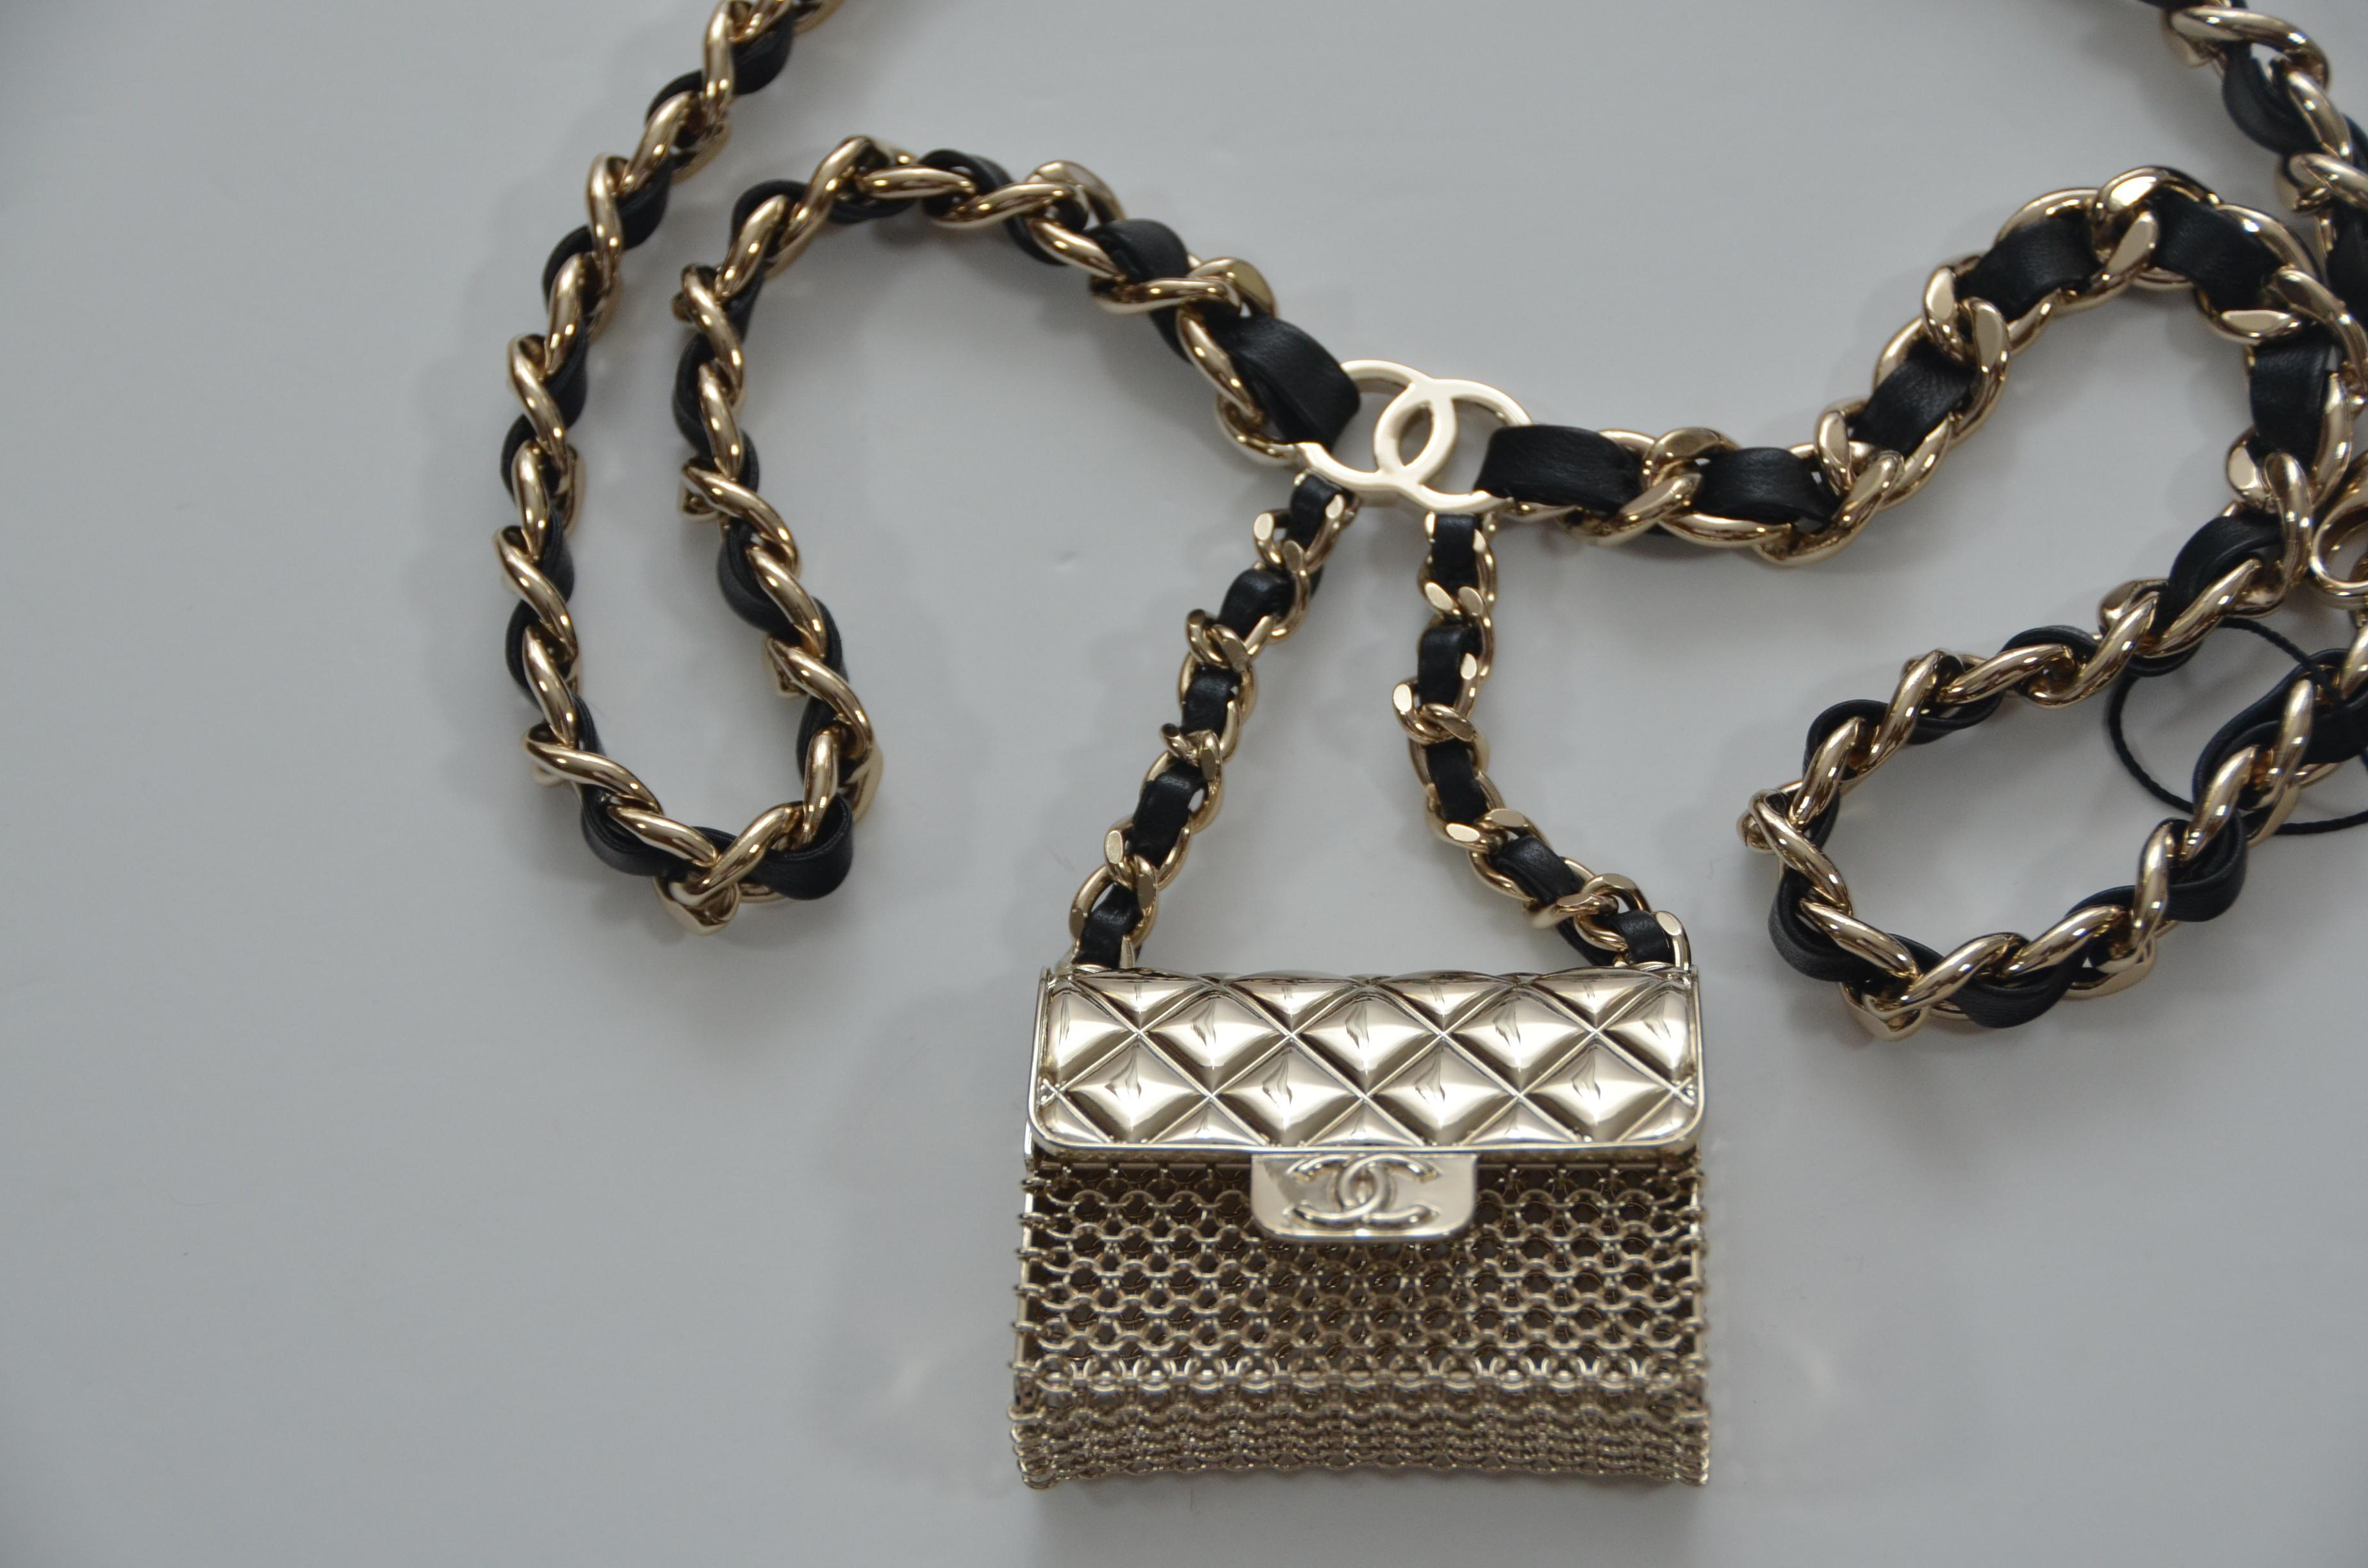 100% authentic guaranteed 
Chanel adjustable belt with mini classic Chanel purse attached
Mini purse can be opened.
Size 80
Sold out in stores and very collectible
New store fresh, only taken out for photography 
Chanel box, tags and mini book